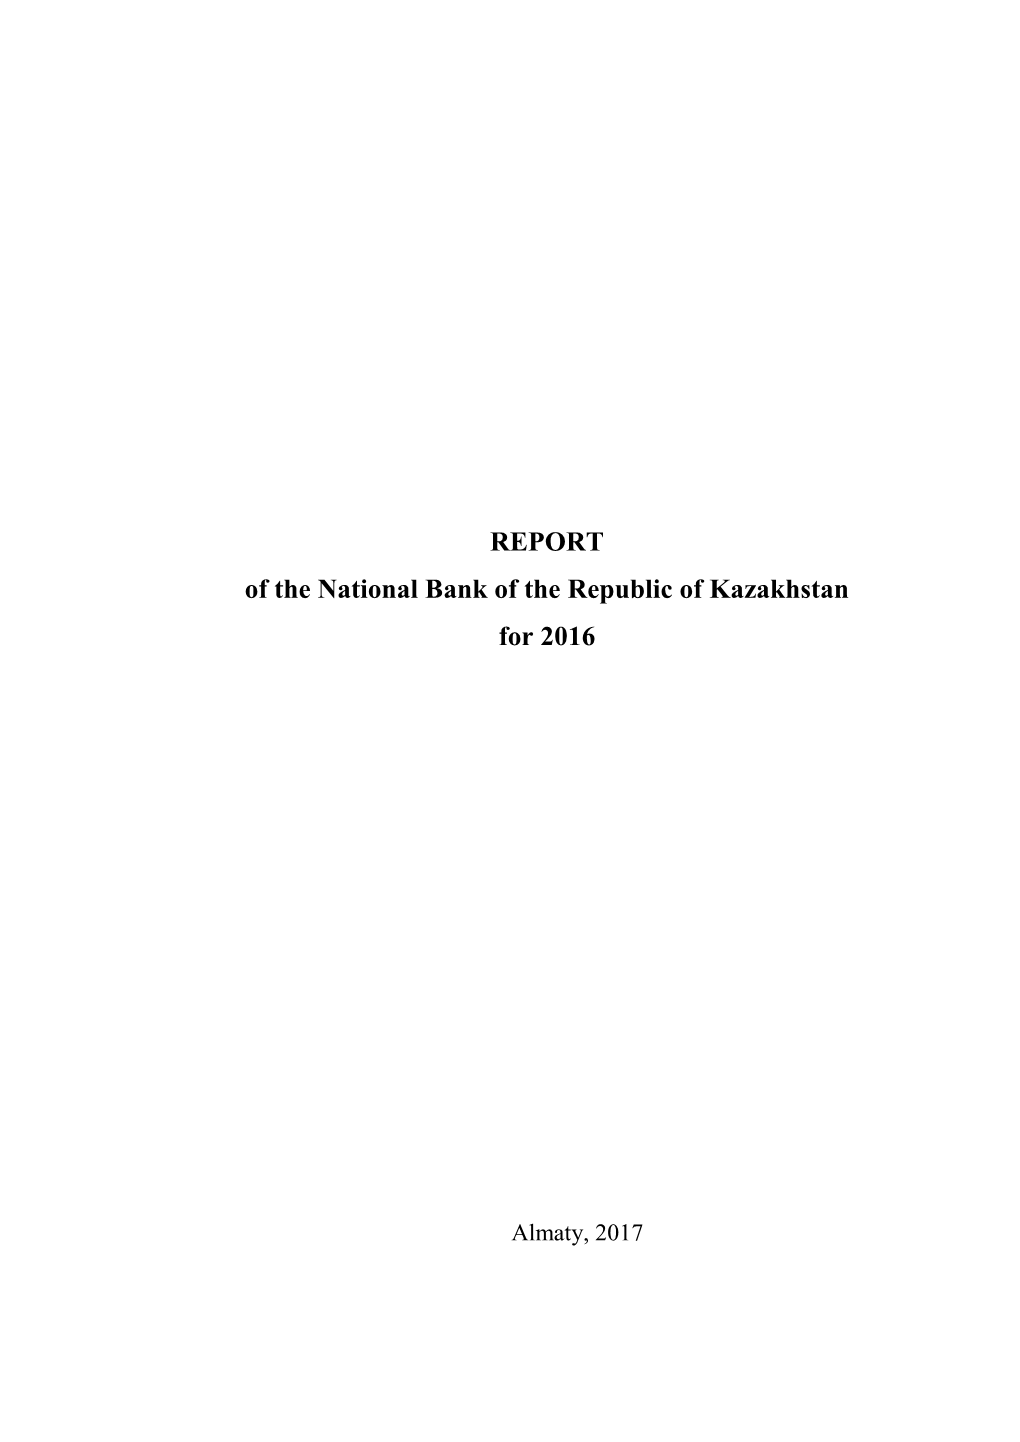 REPORT of the National Bank of the Republic of Kazakhstan for 2016